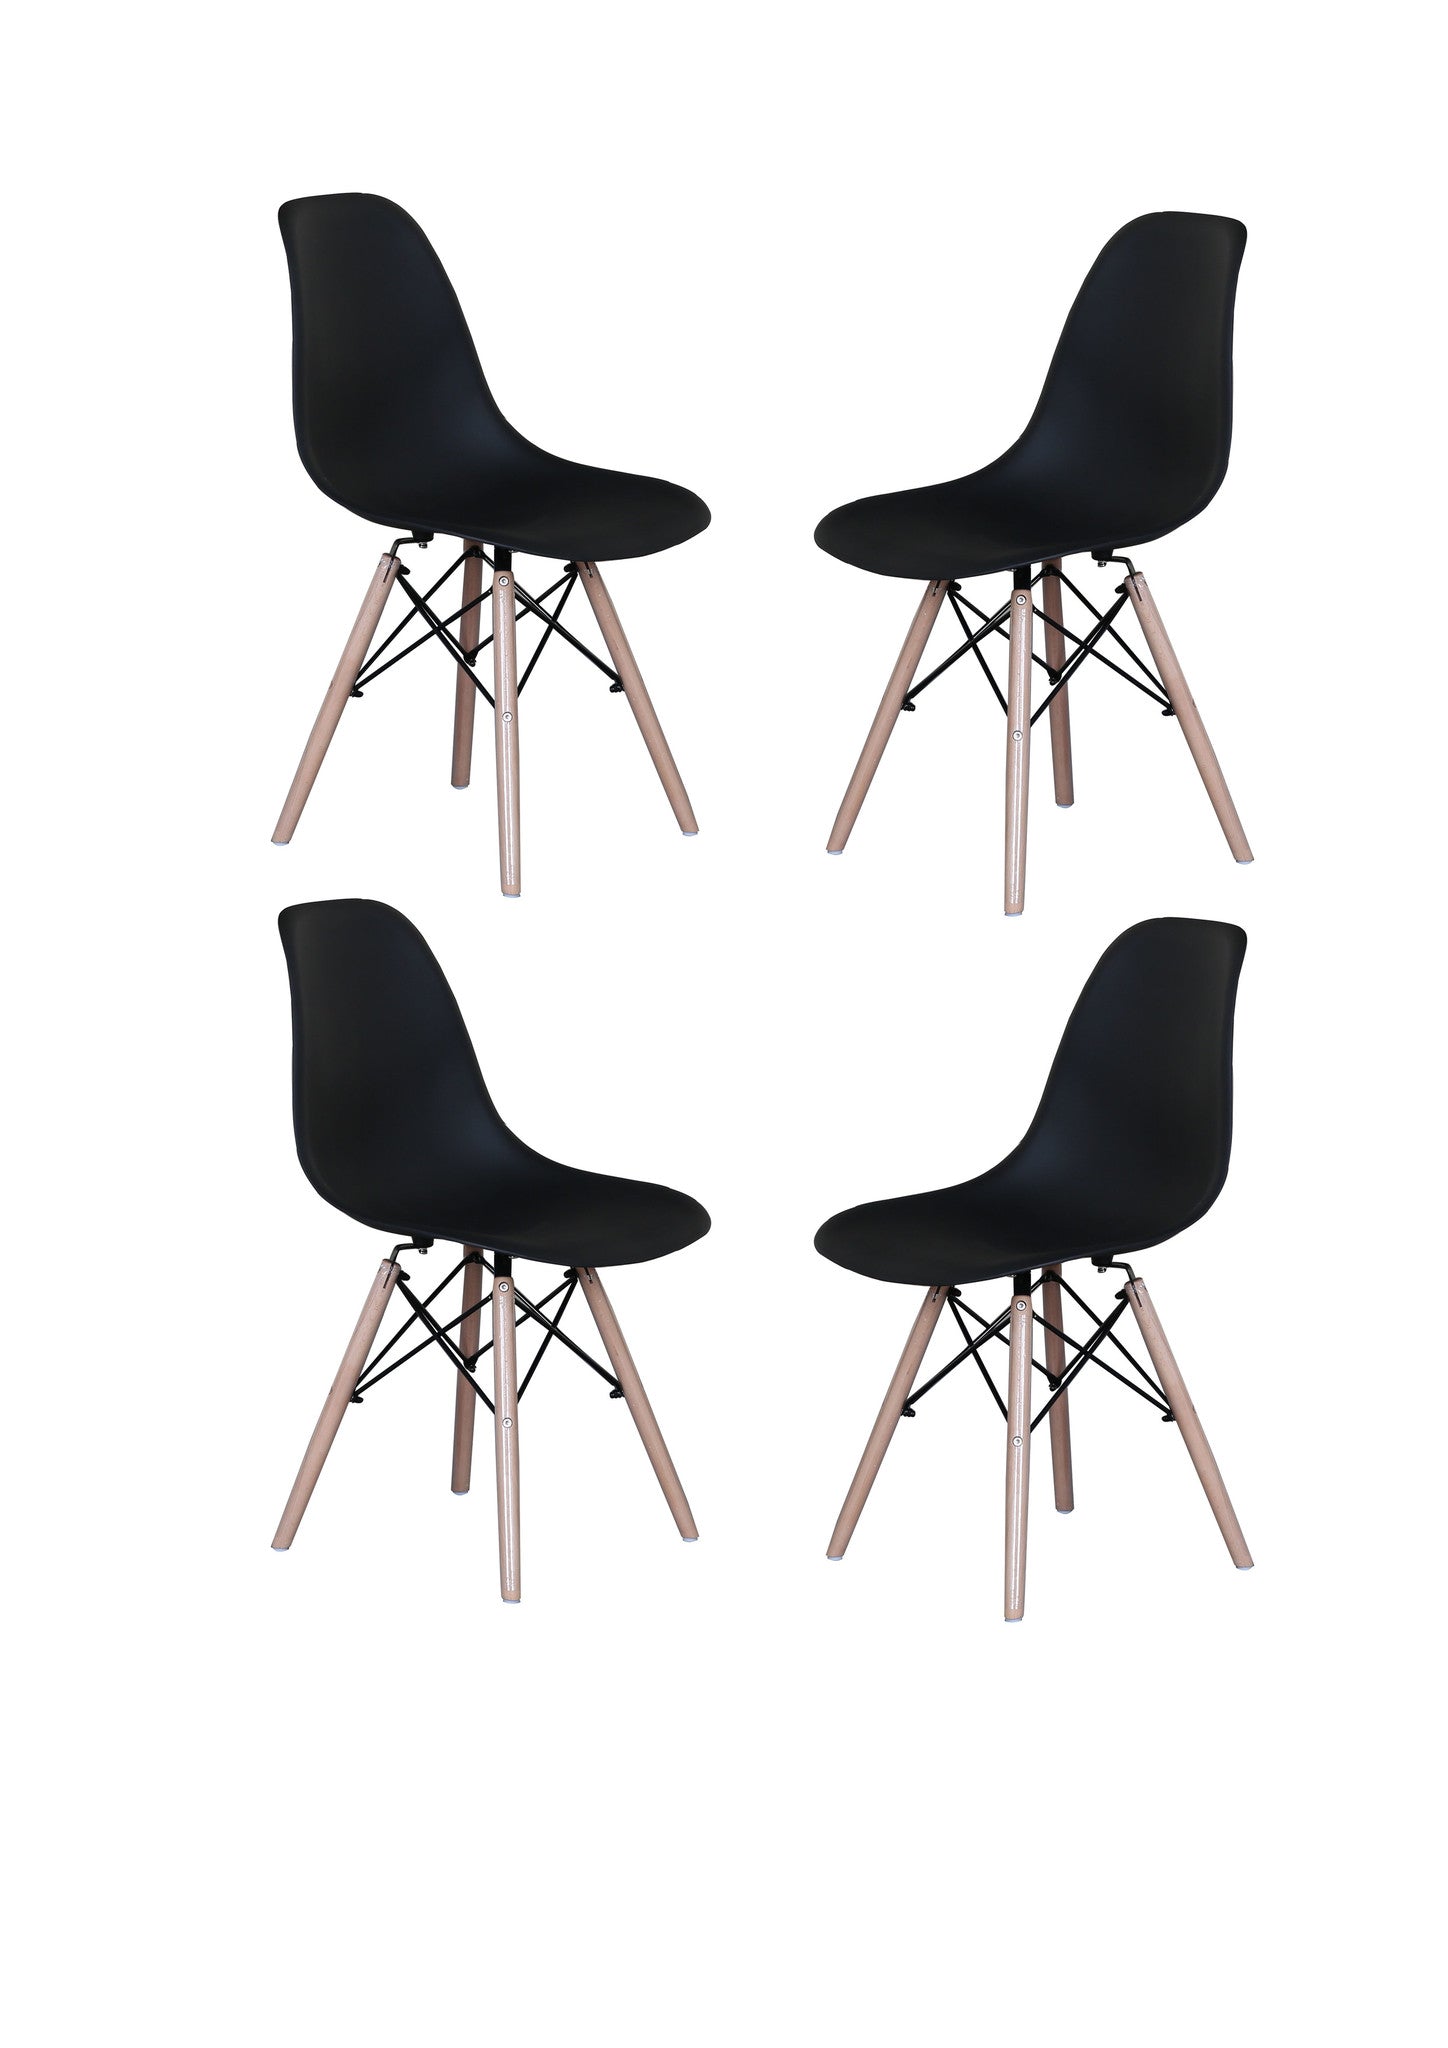 Ray Set of 4 Classic Modern Eames-Inspired Chairs